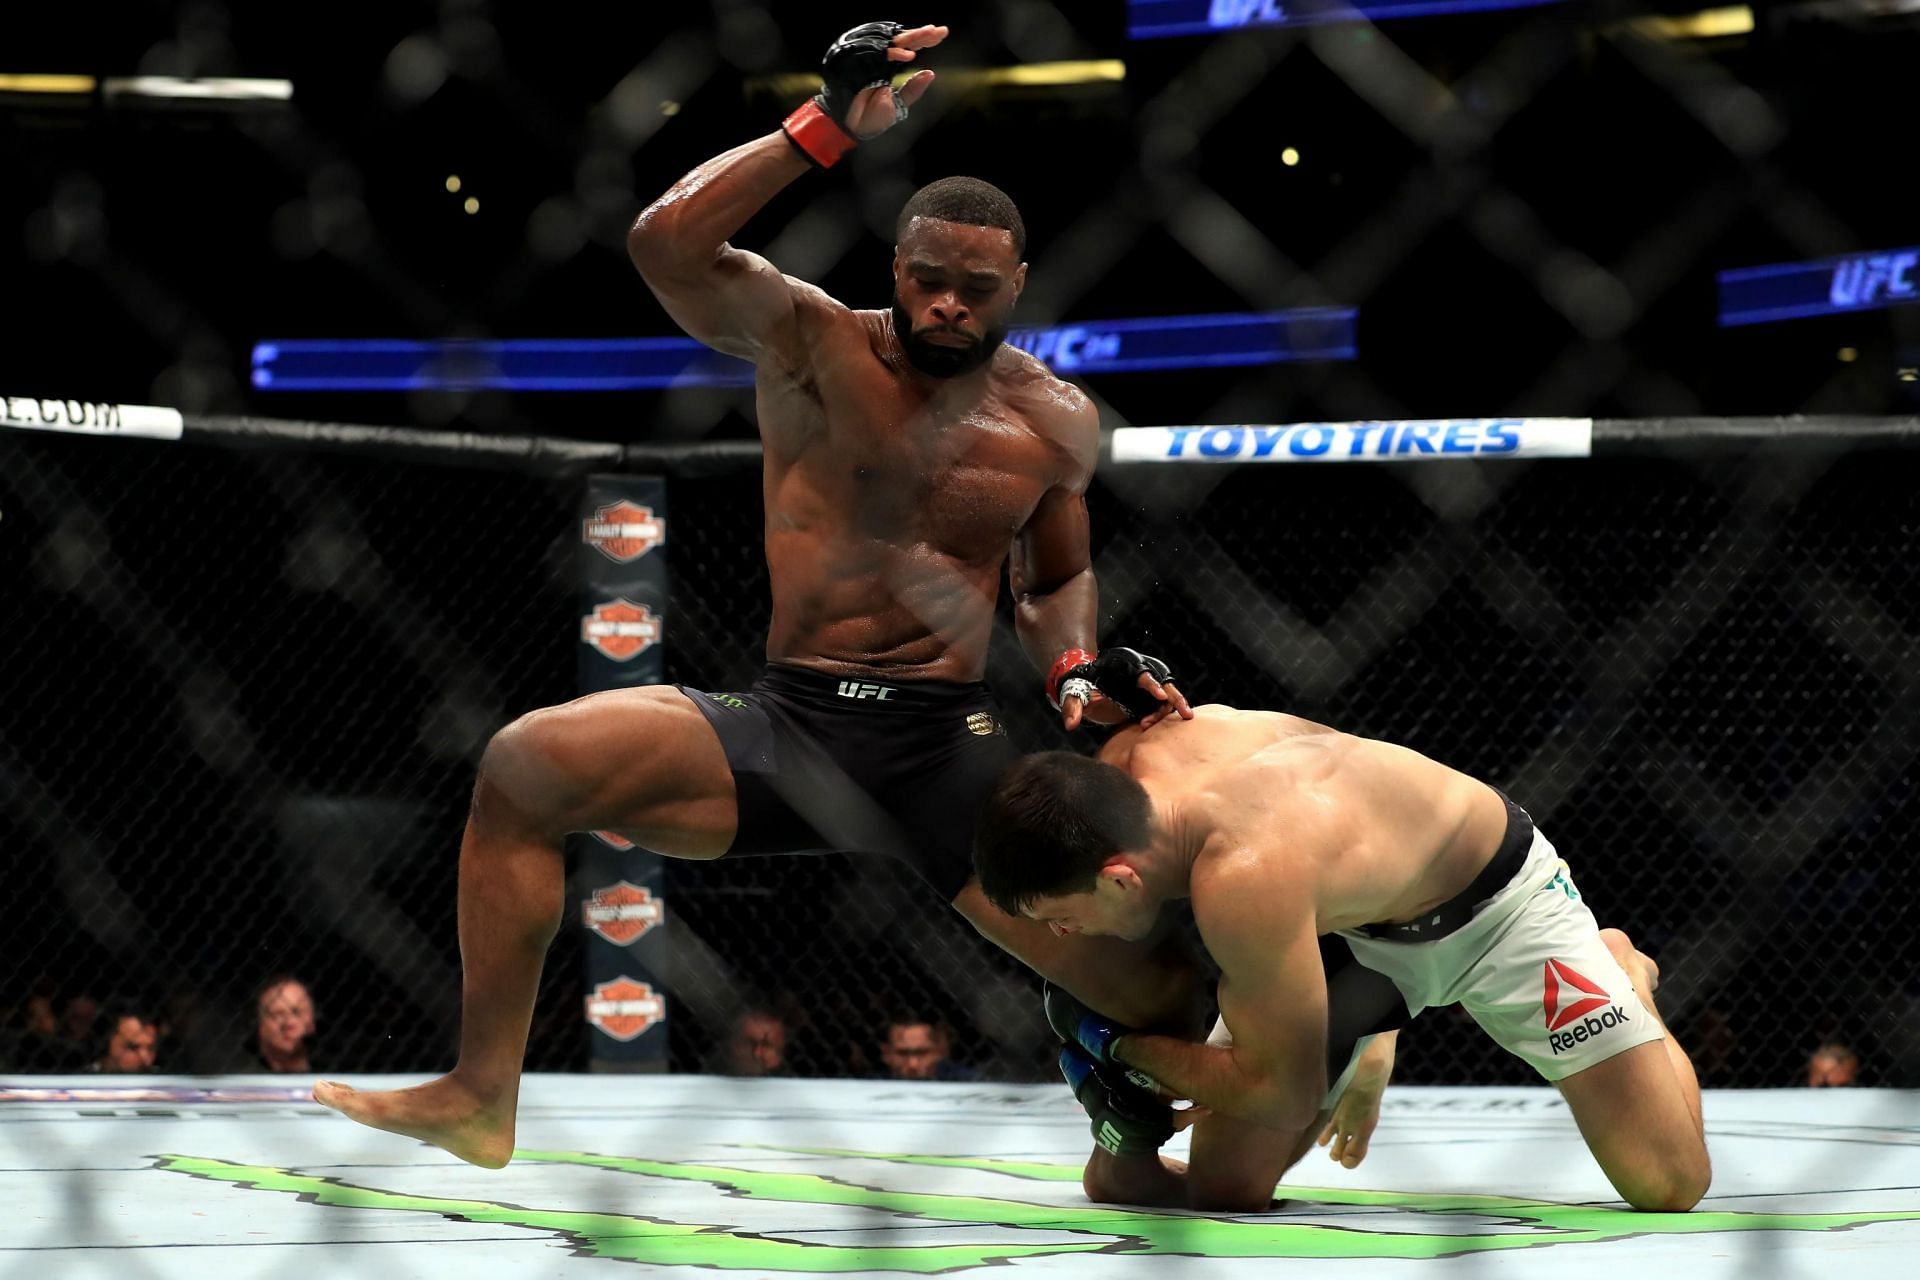 Tyron Woodley&#039;s reign as welterweight champ was widely panned due to some dull title defenses